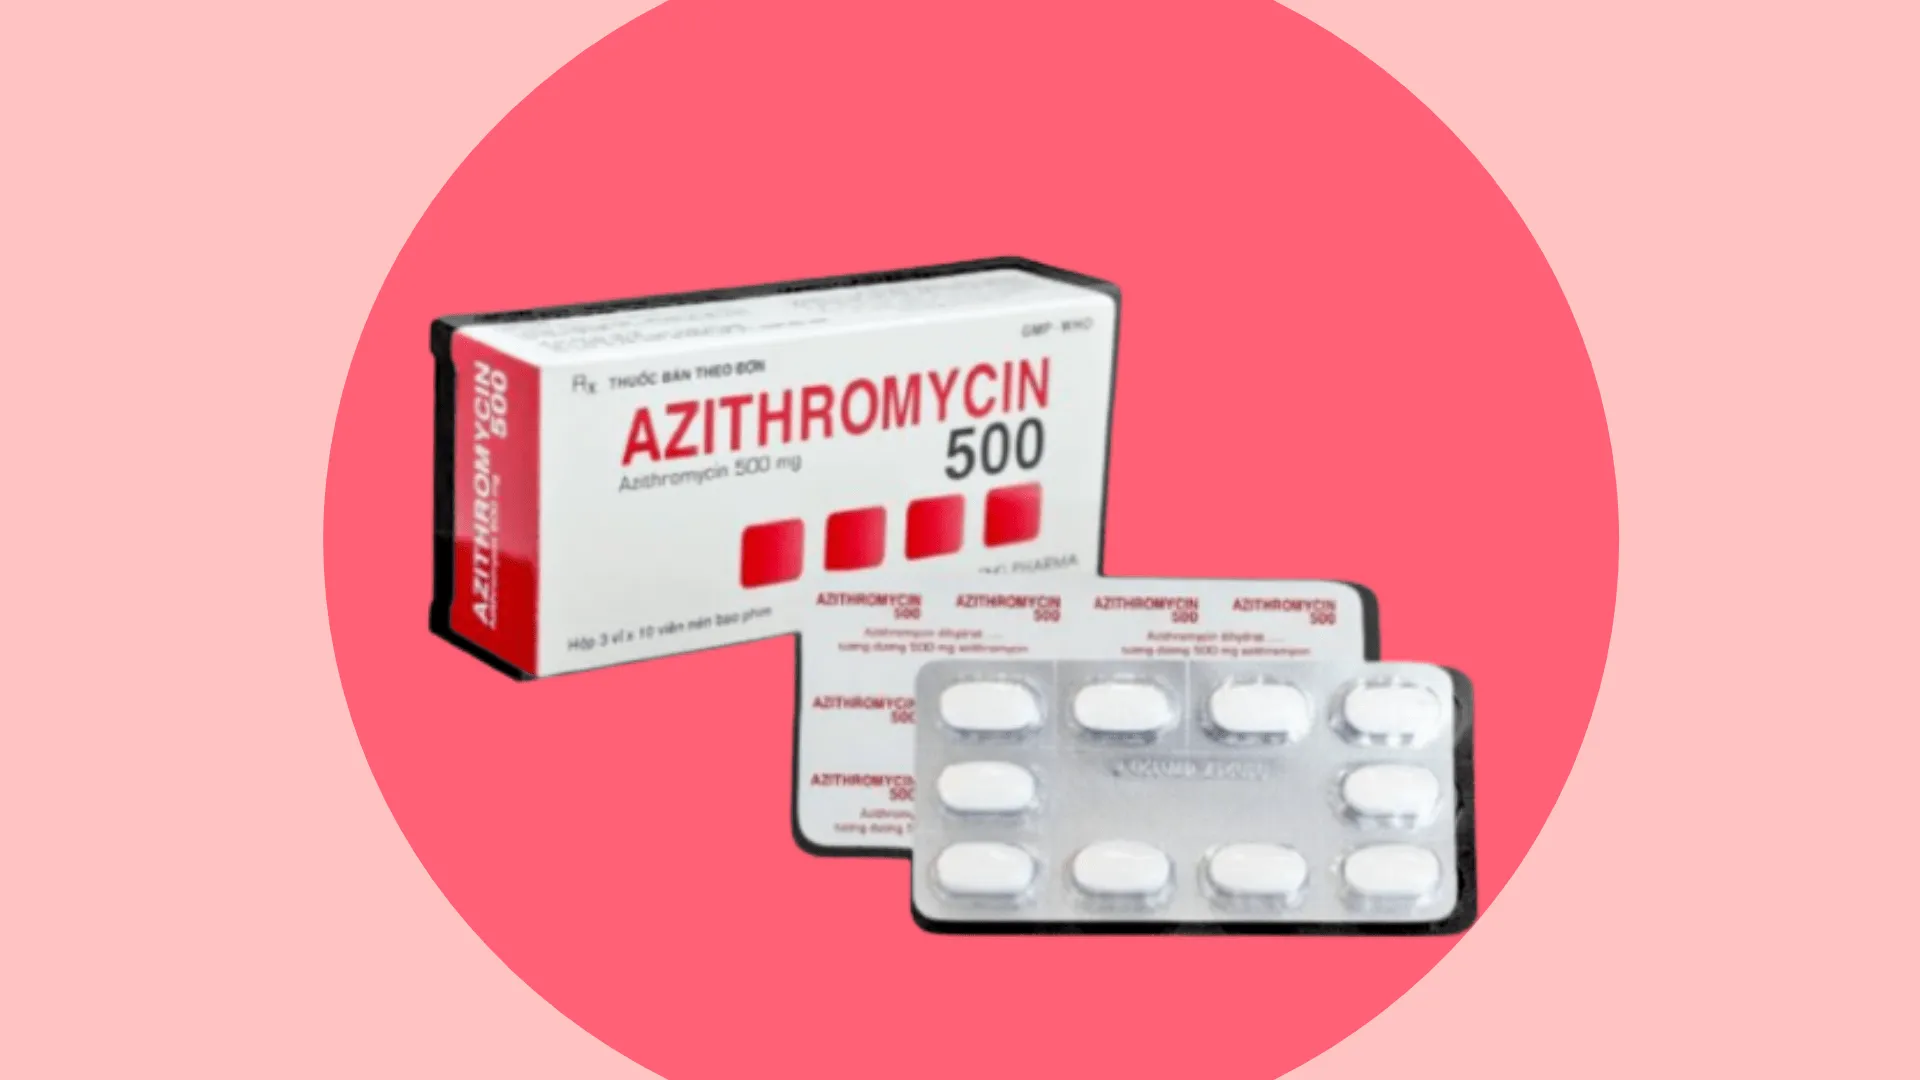 Azithromycin 500 Tablet - Uses, Side Effects, Doses, Price and Warning